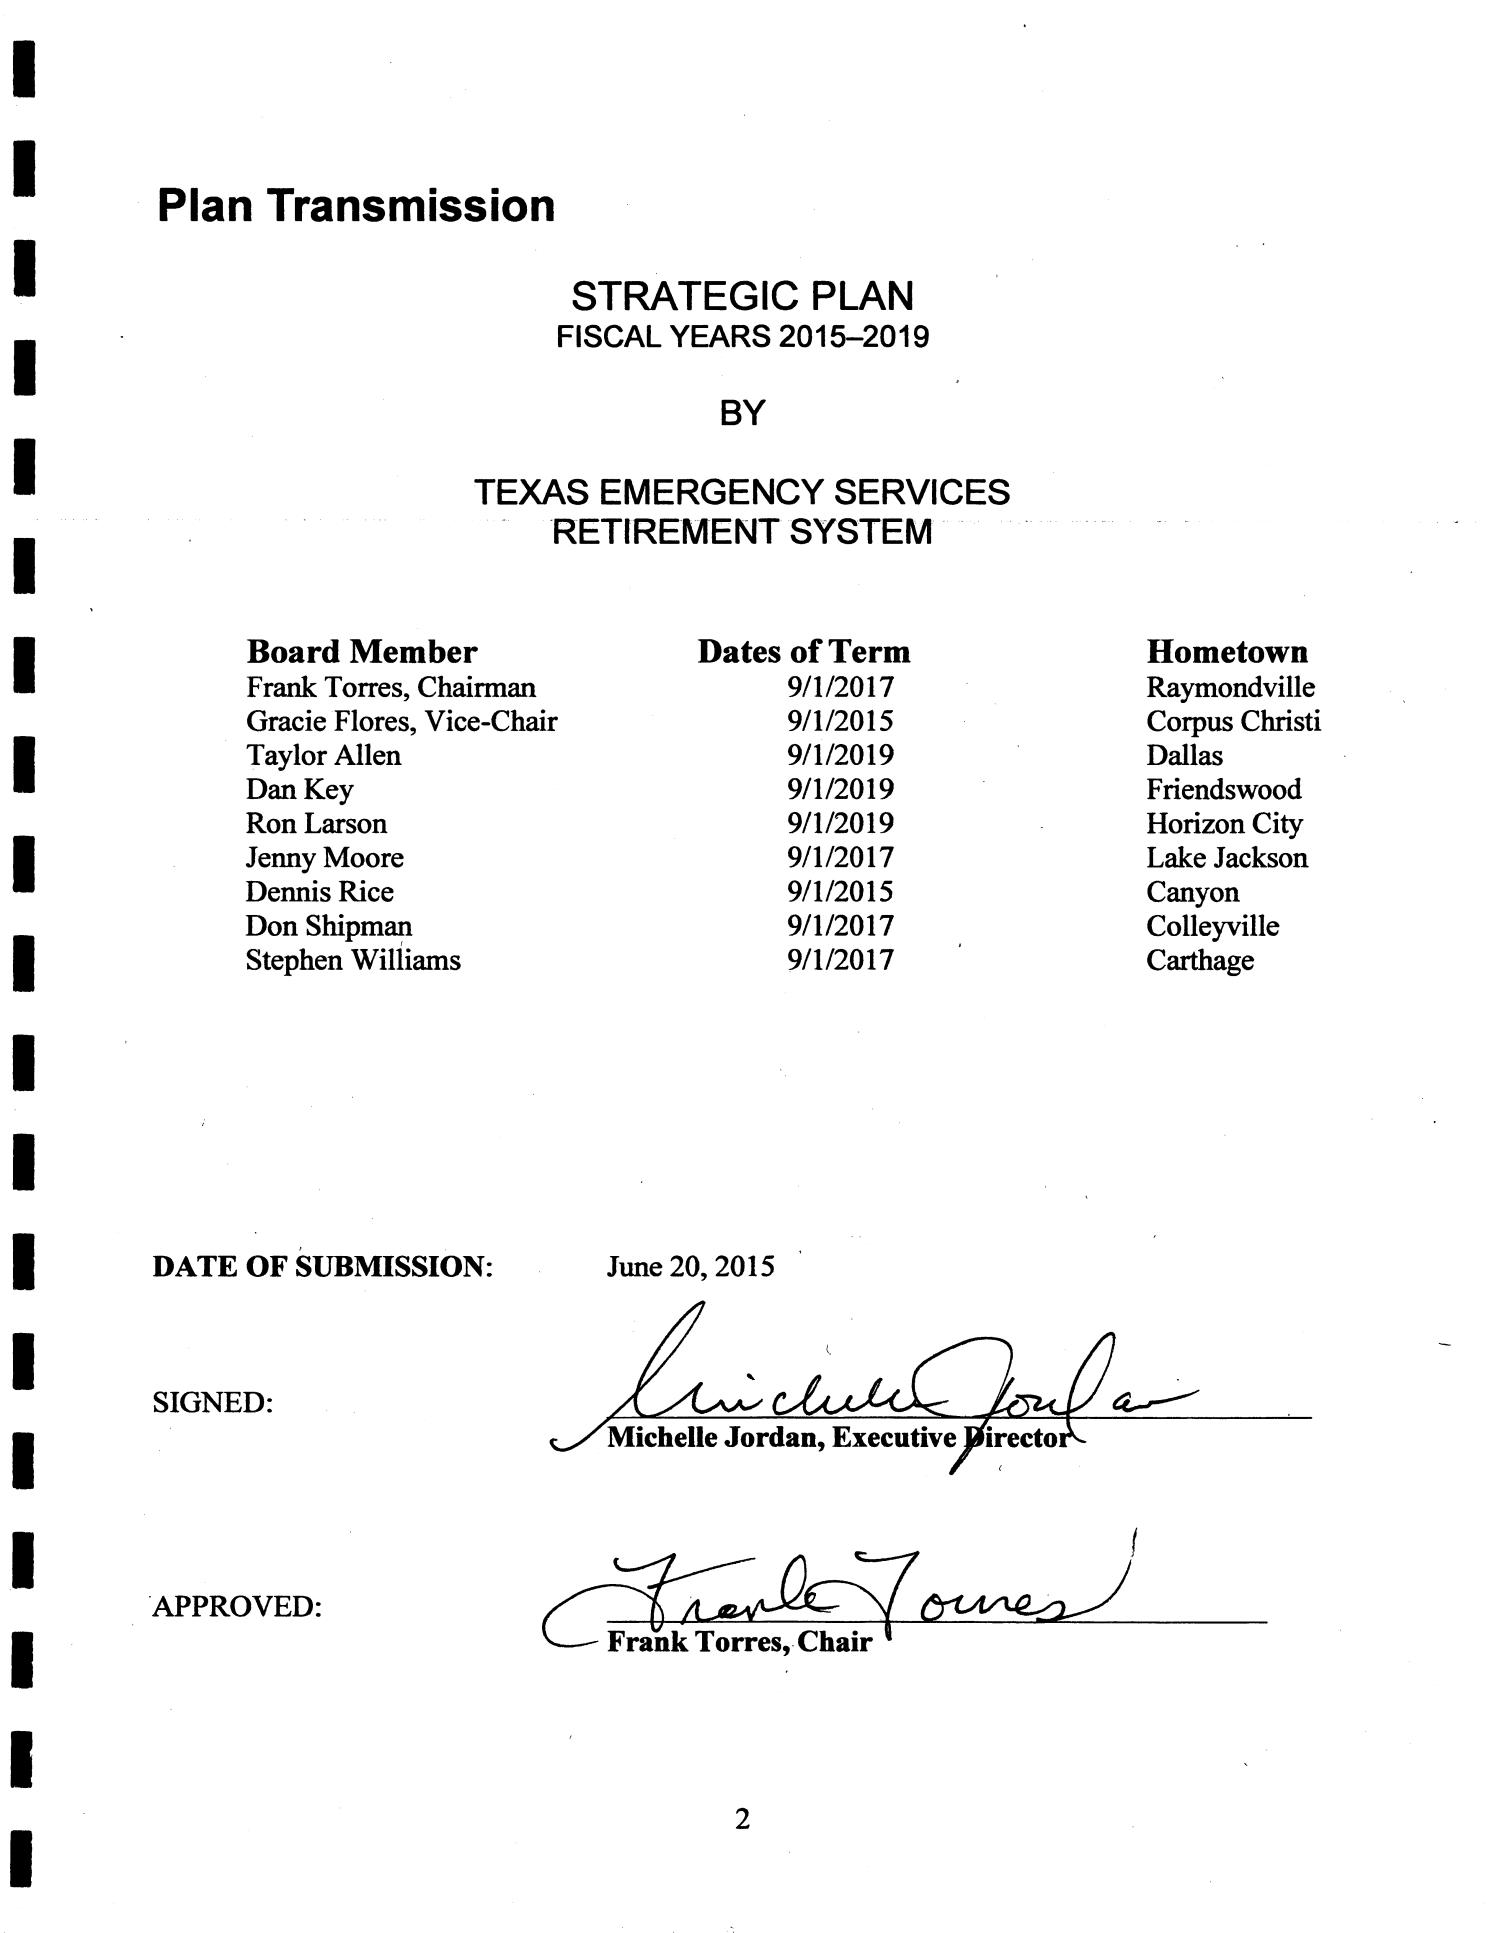 Texas Emergency Services Retirement System Strategic Plan: Fiscal Years 2015-2019
                                                
                                                    2
                                                